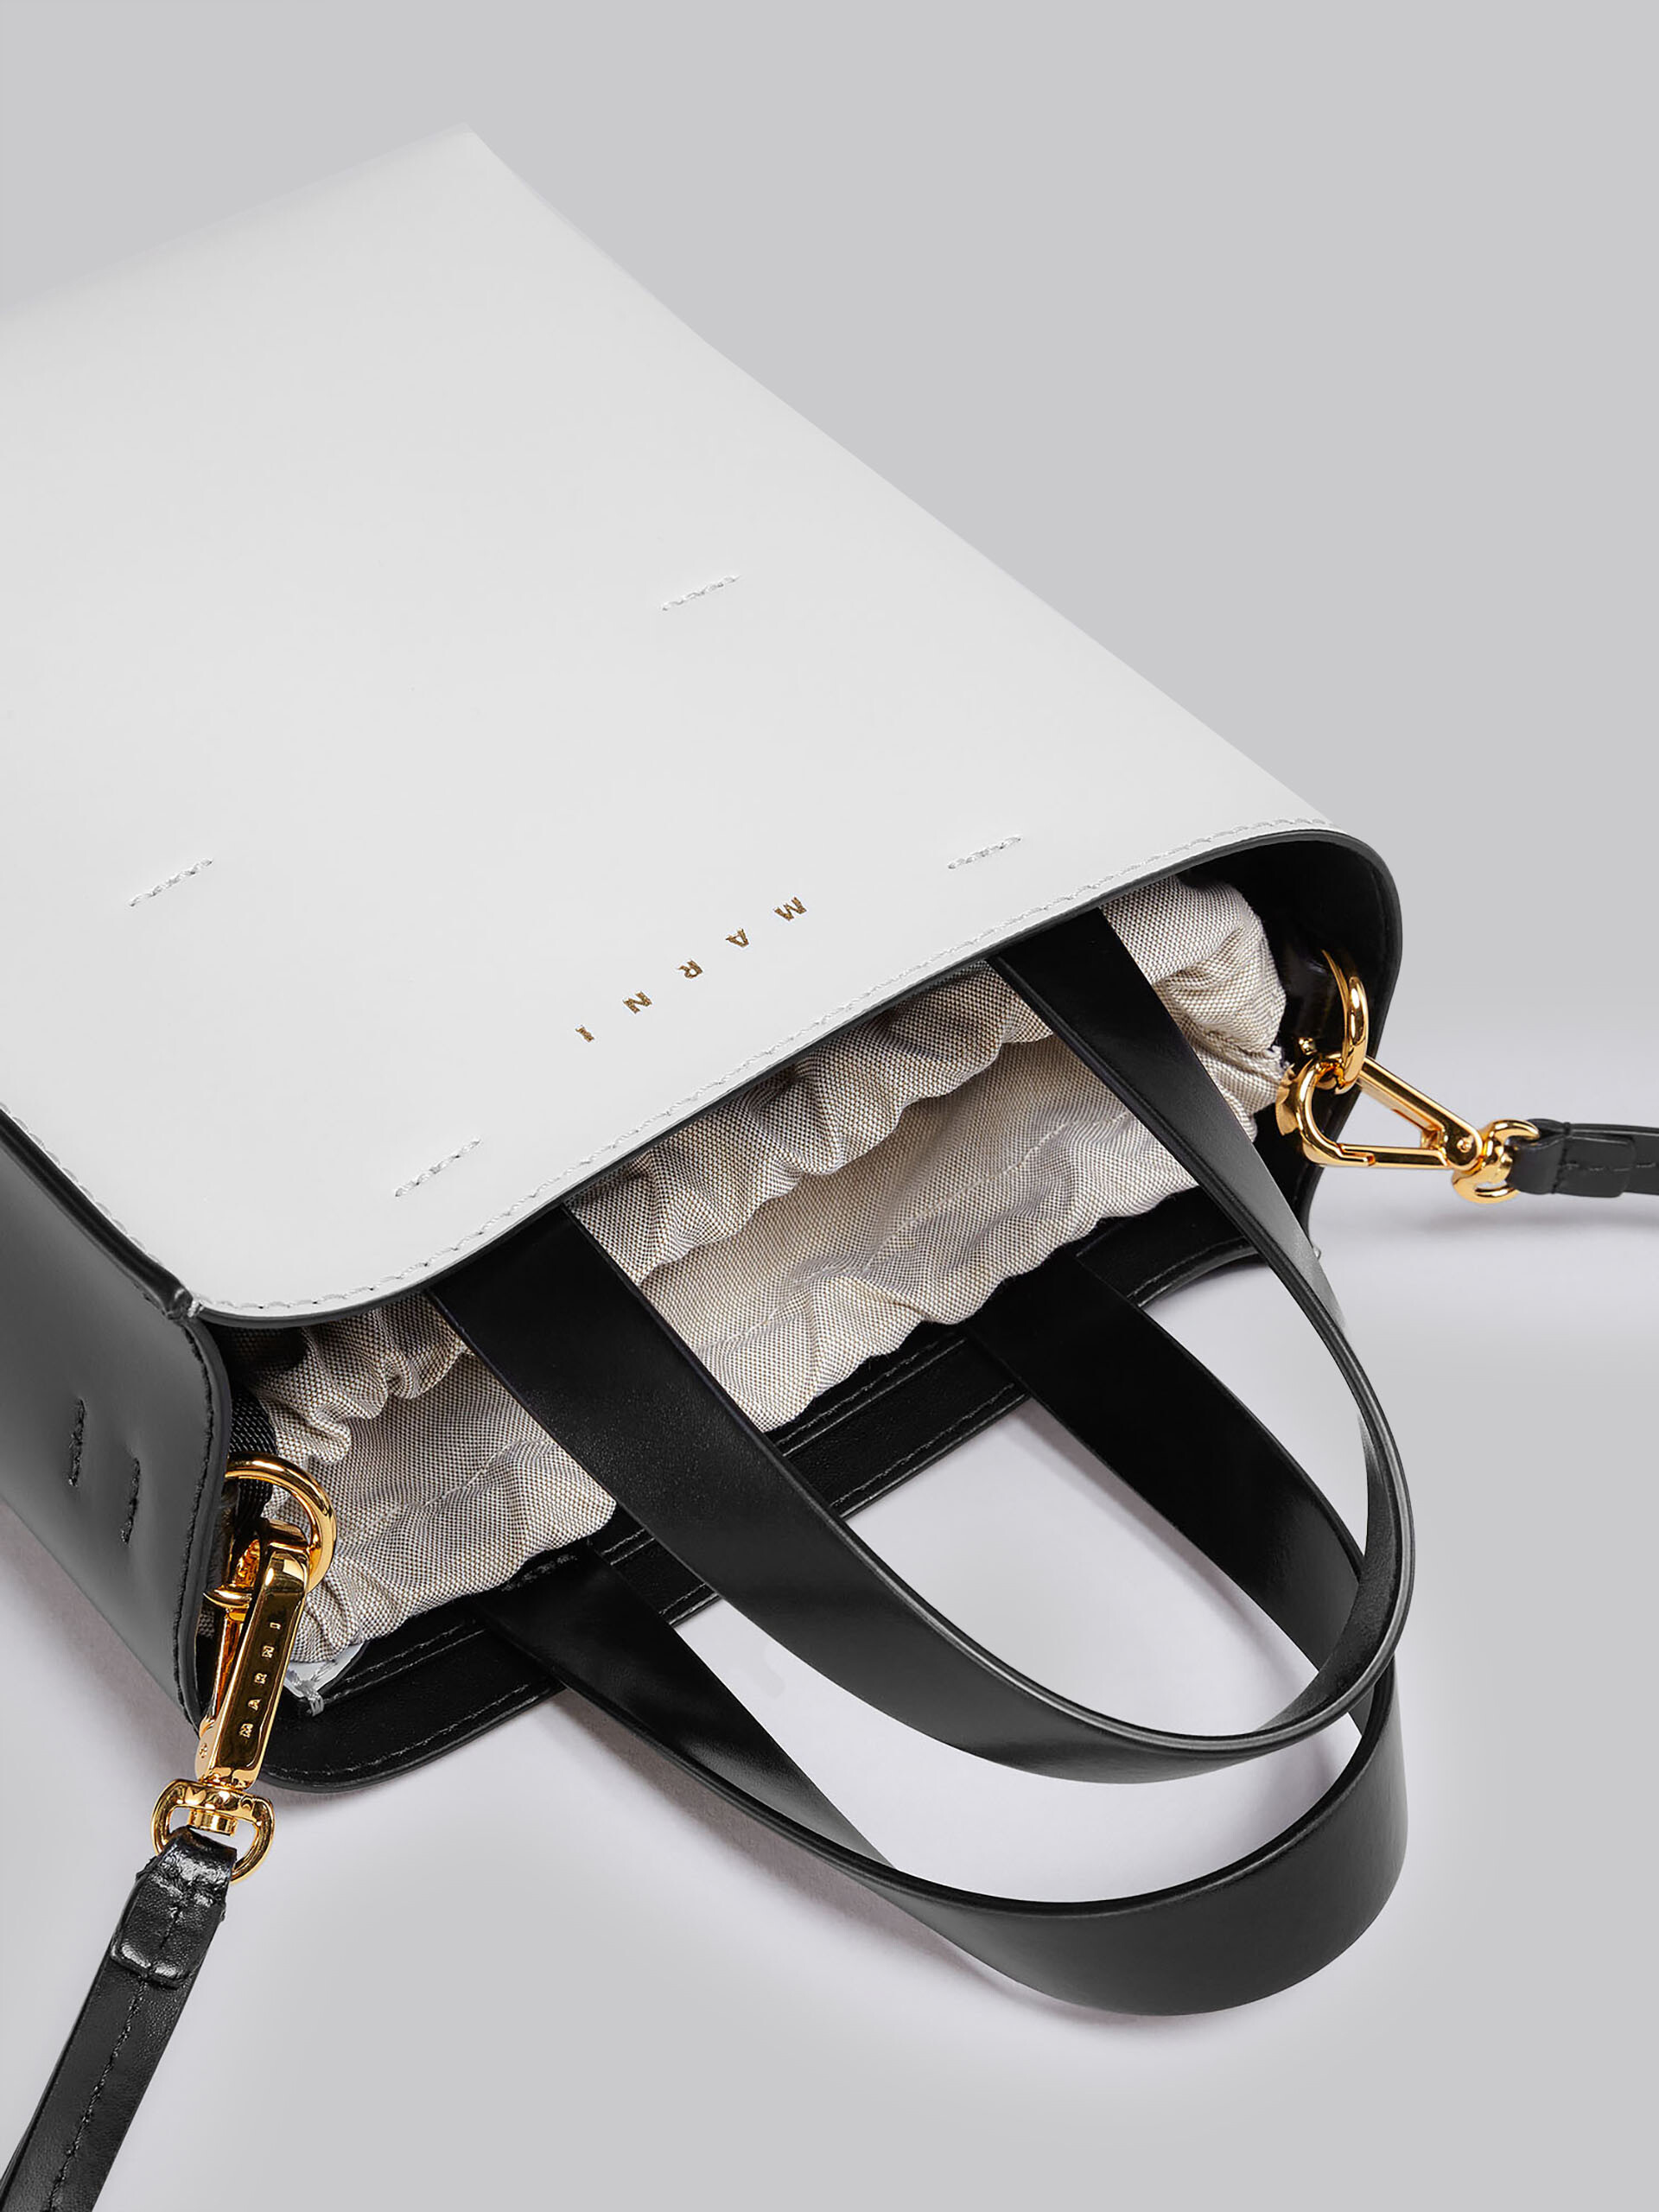 MUSEO mini bag in white and black leather - Shopping Bags - Image 5